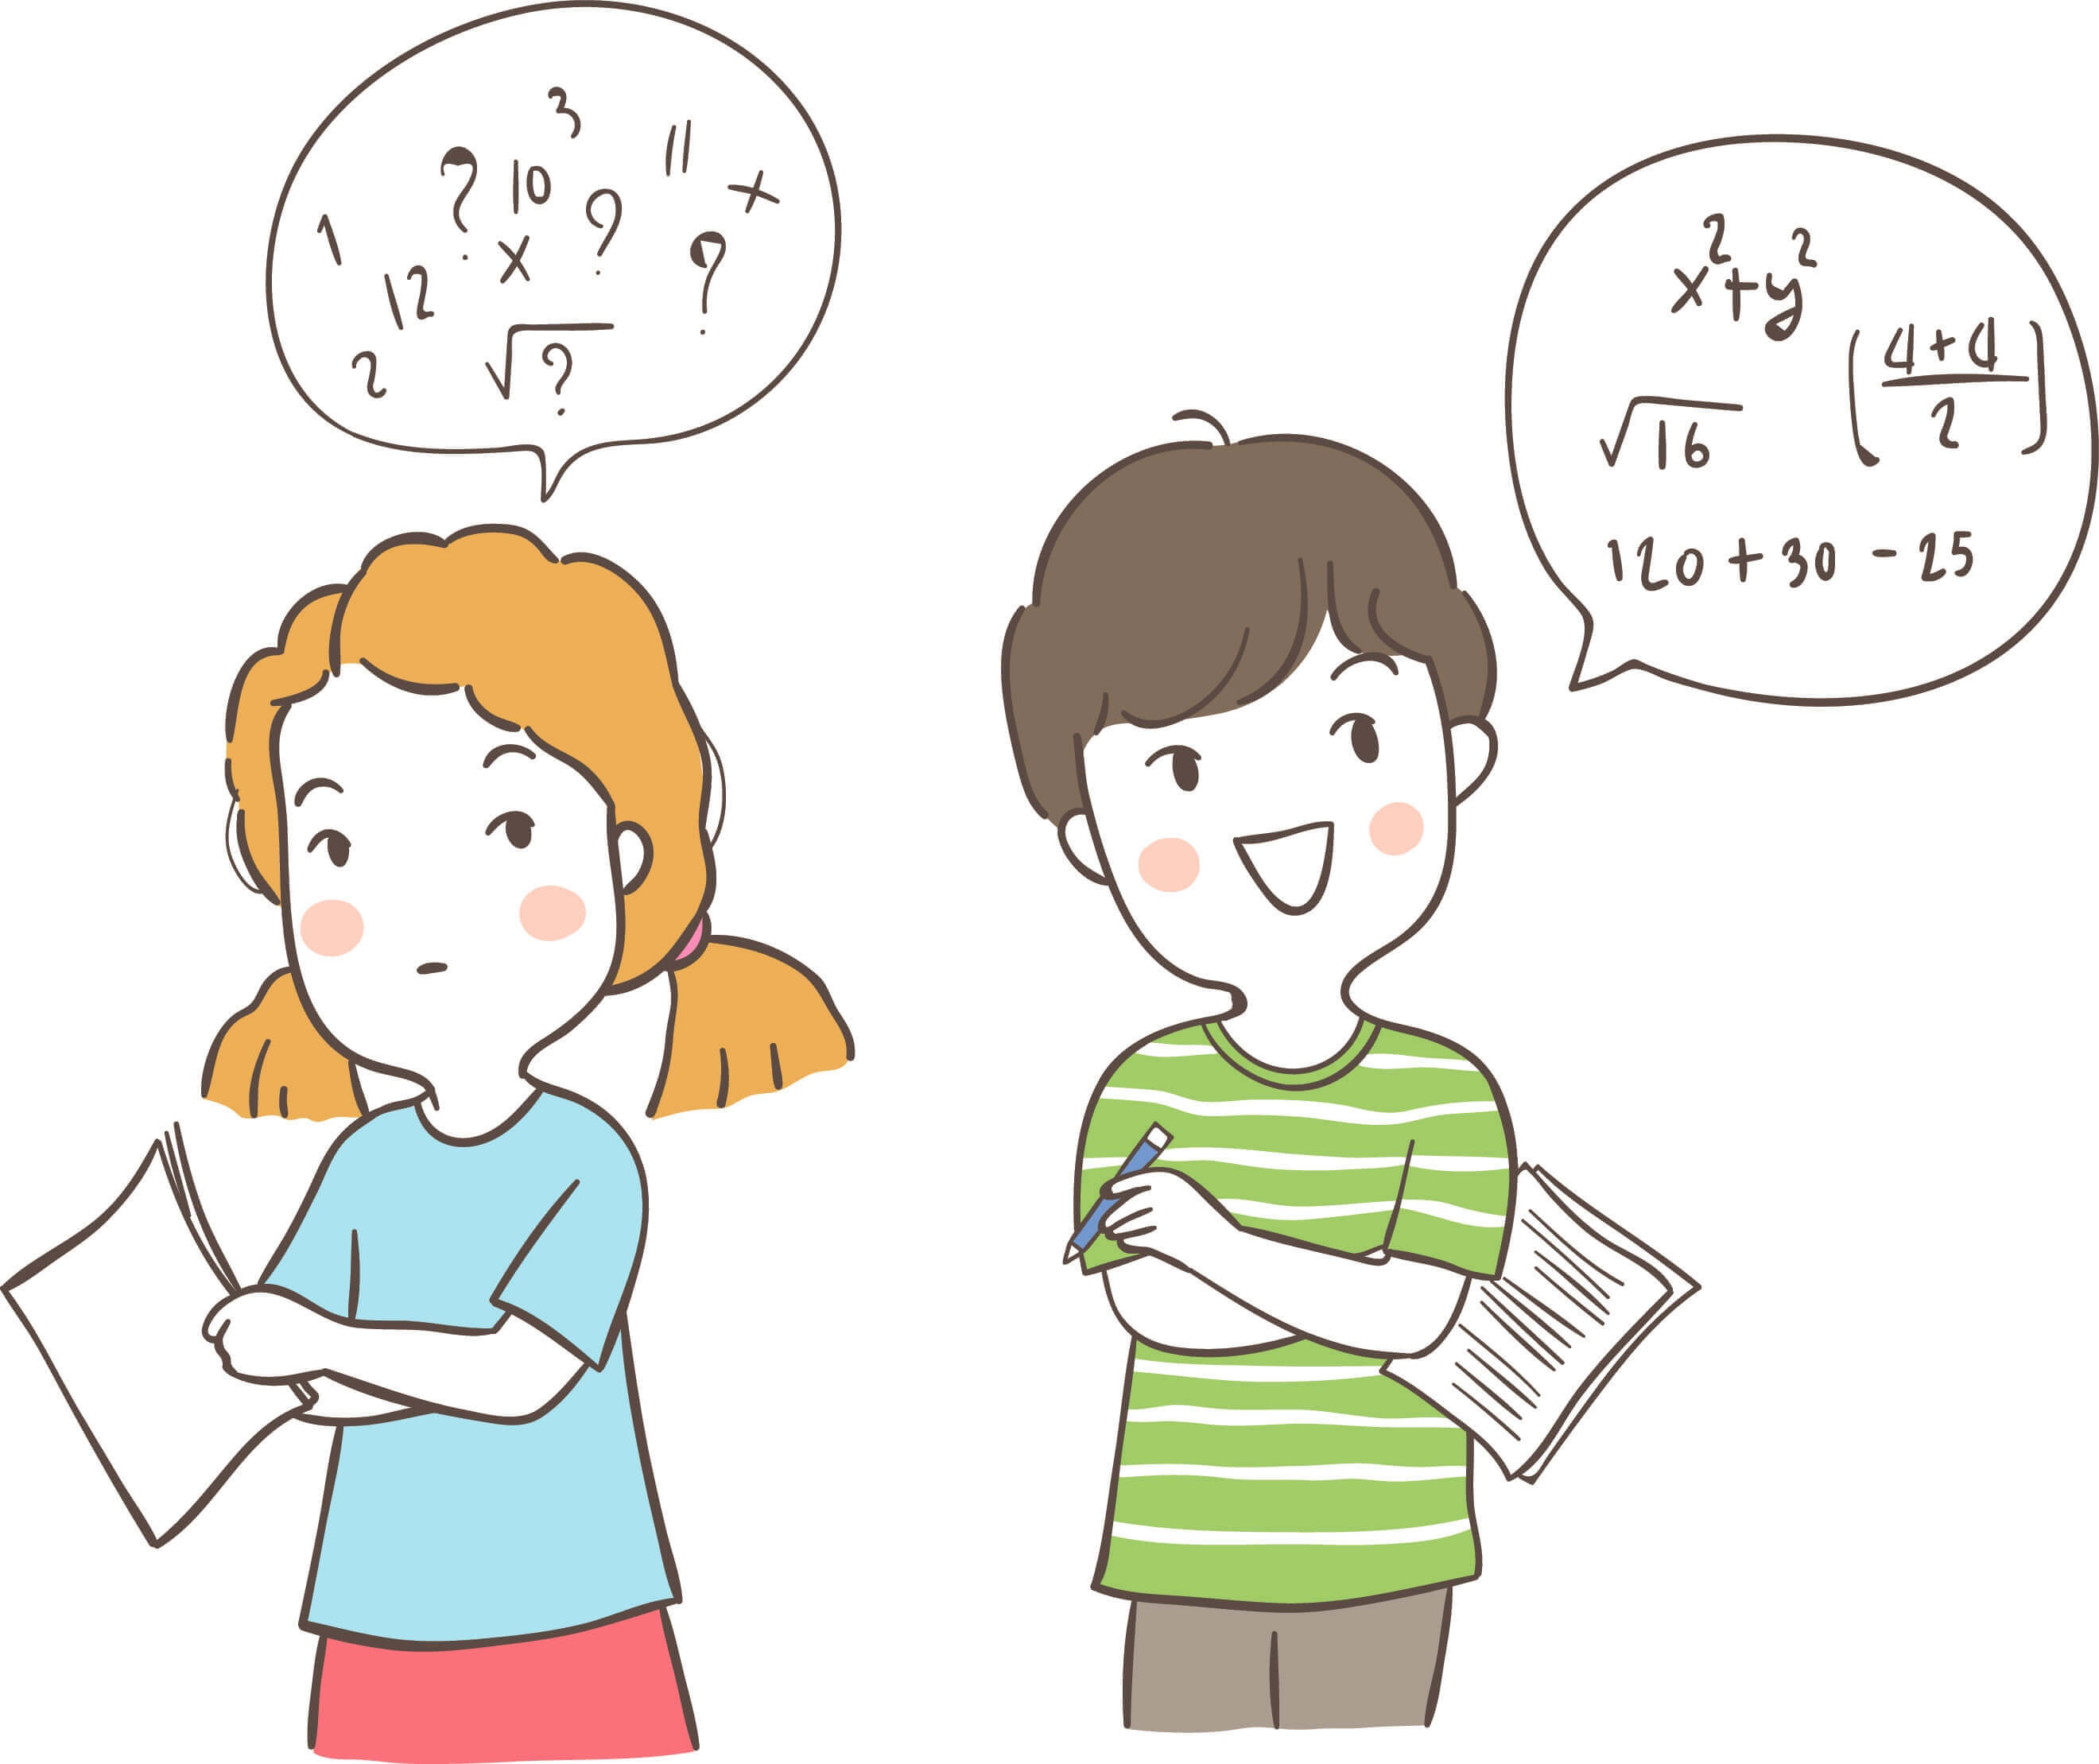 Is there a need to teach math differently to girls and boys?